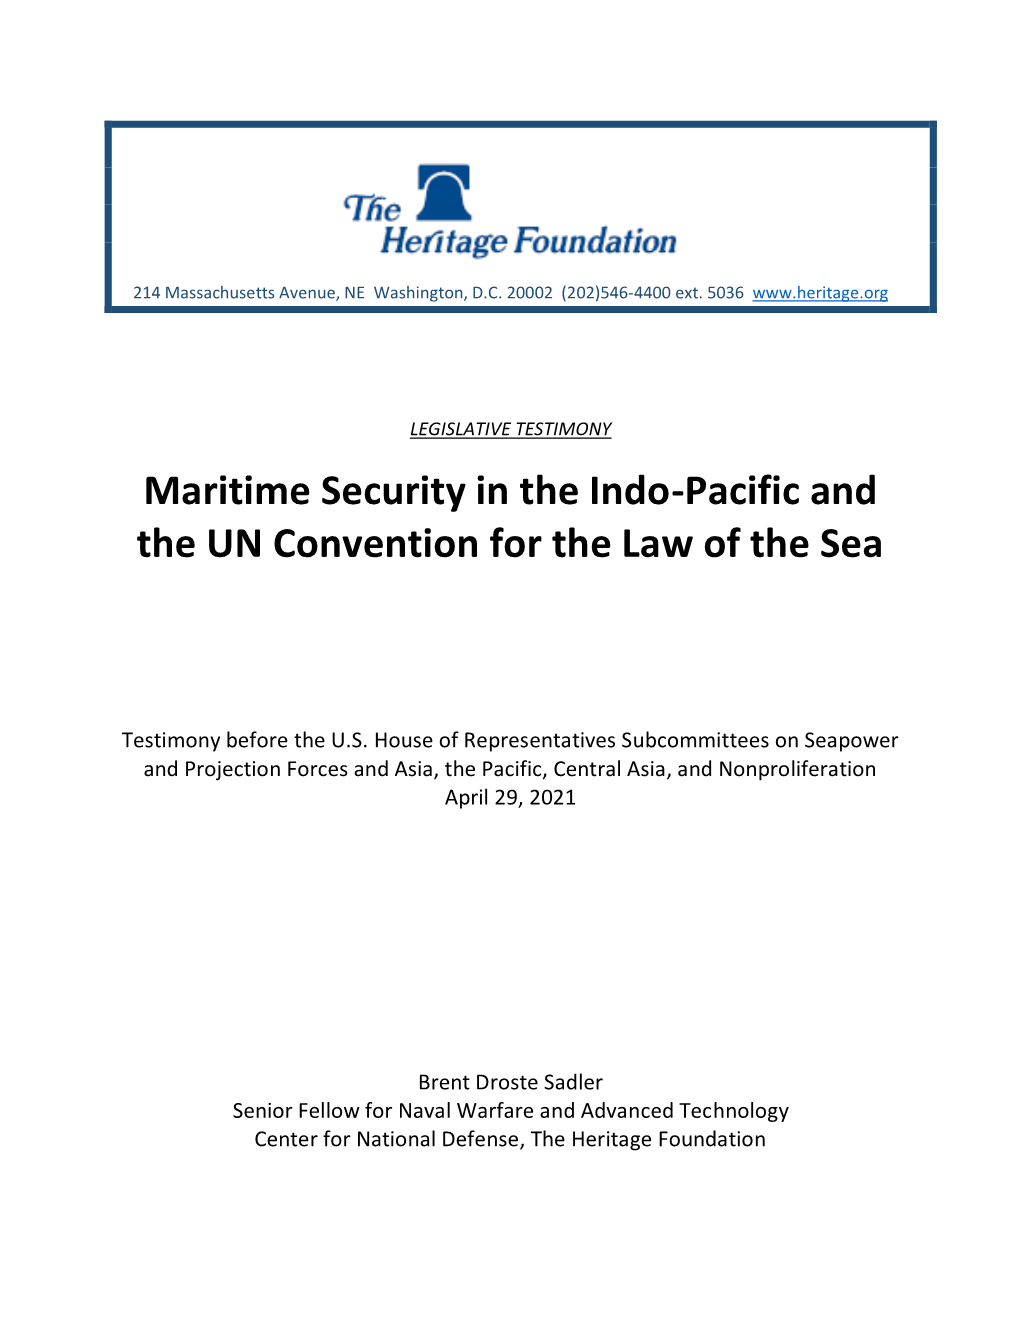 Maritime Security in the Indo-Pacific and the UN Convention for the Law of the Sea